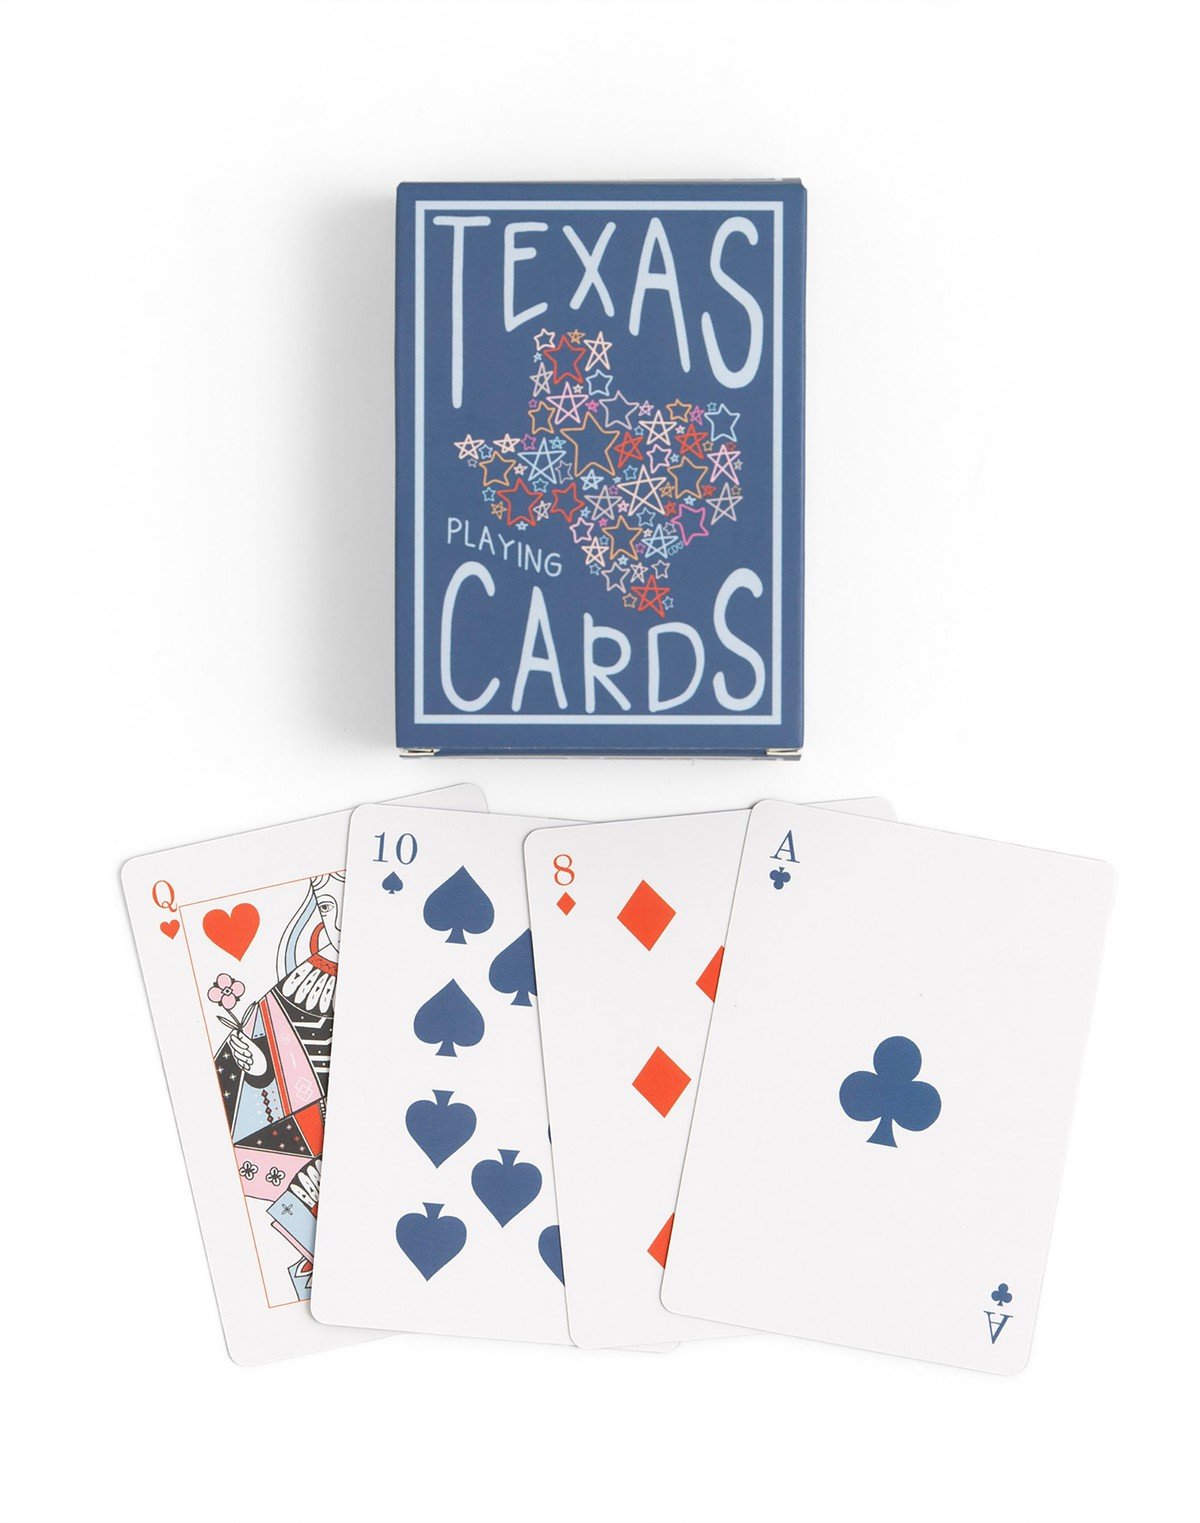 Texas Western Stars Deck of Playing Cards item